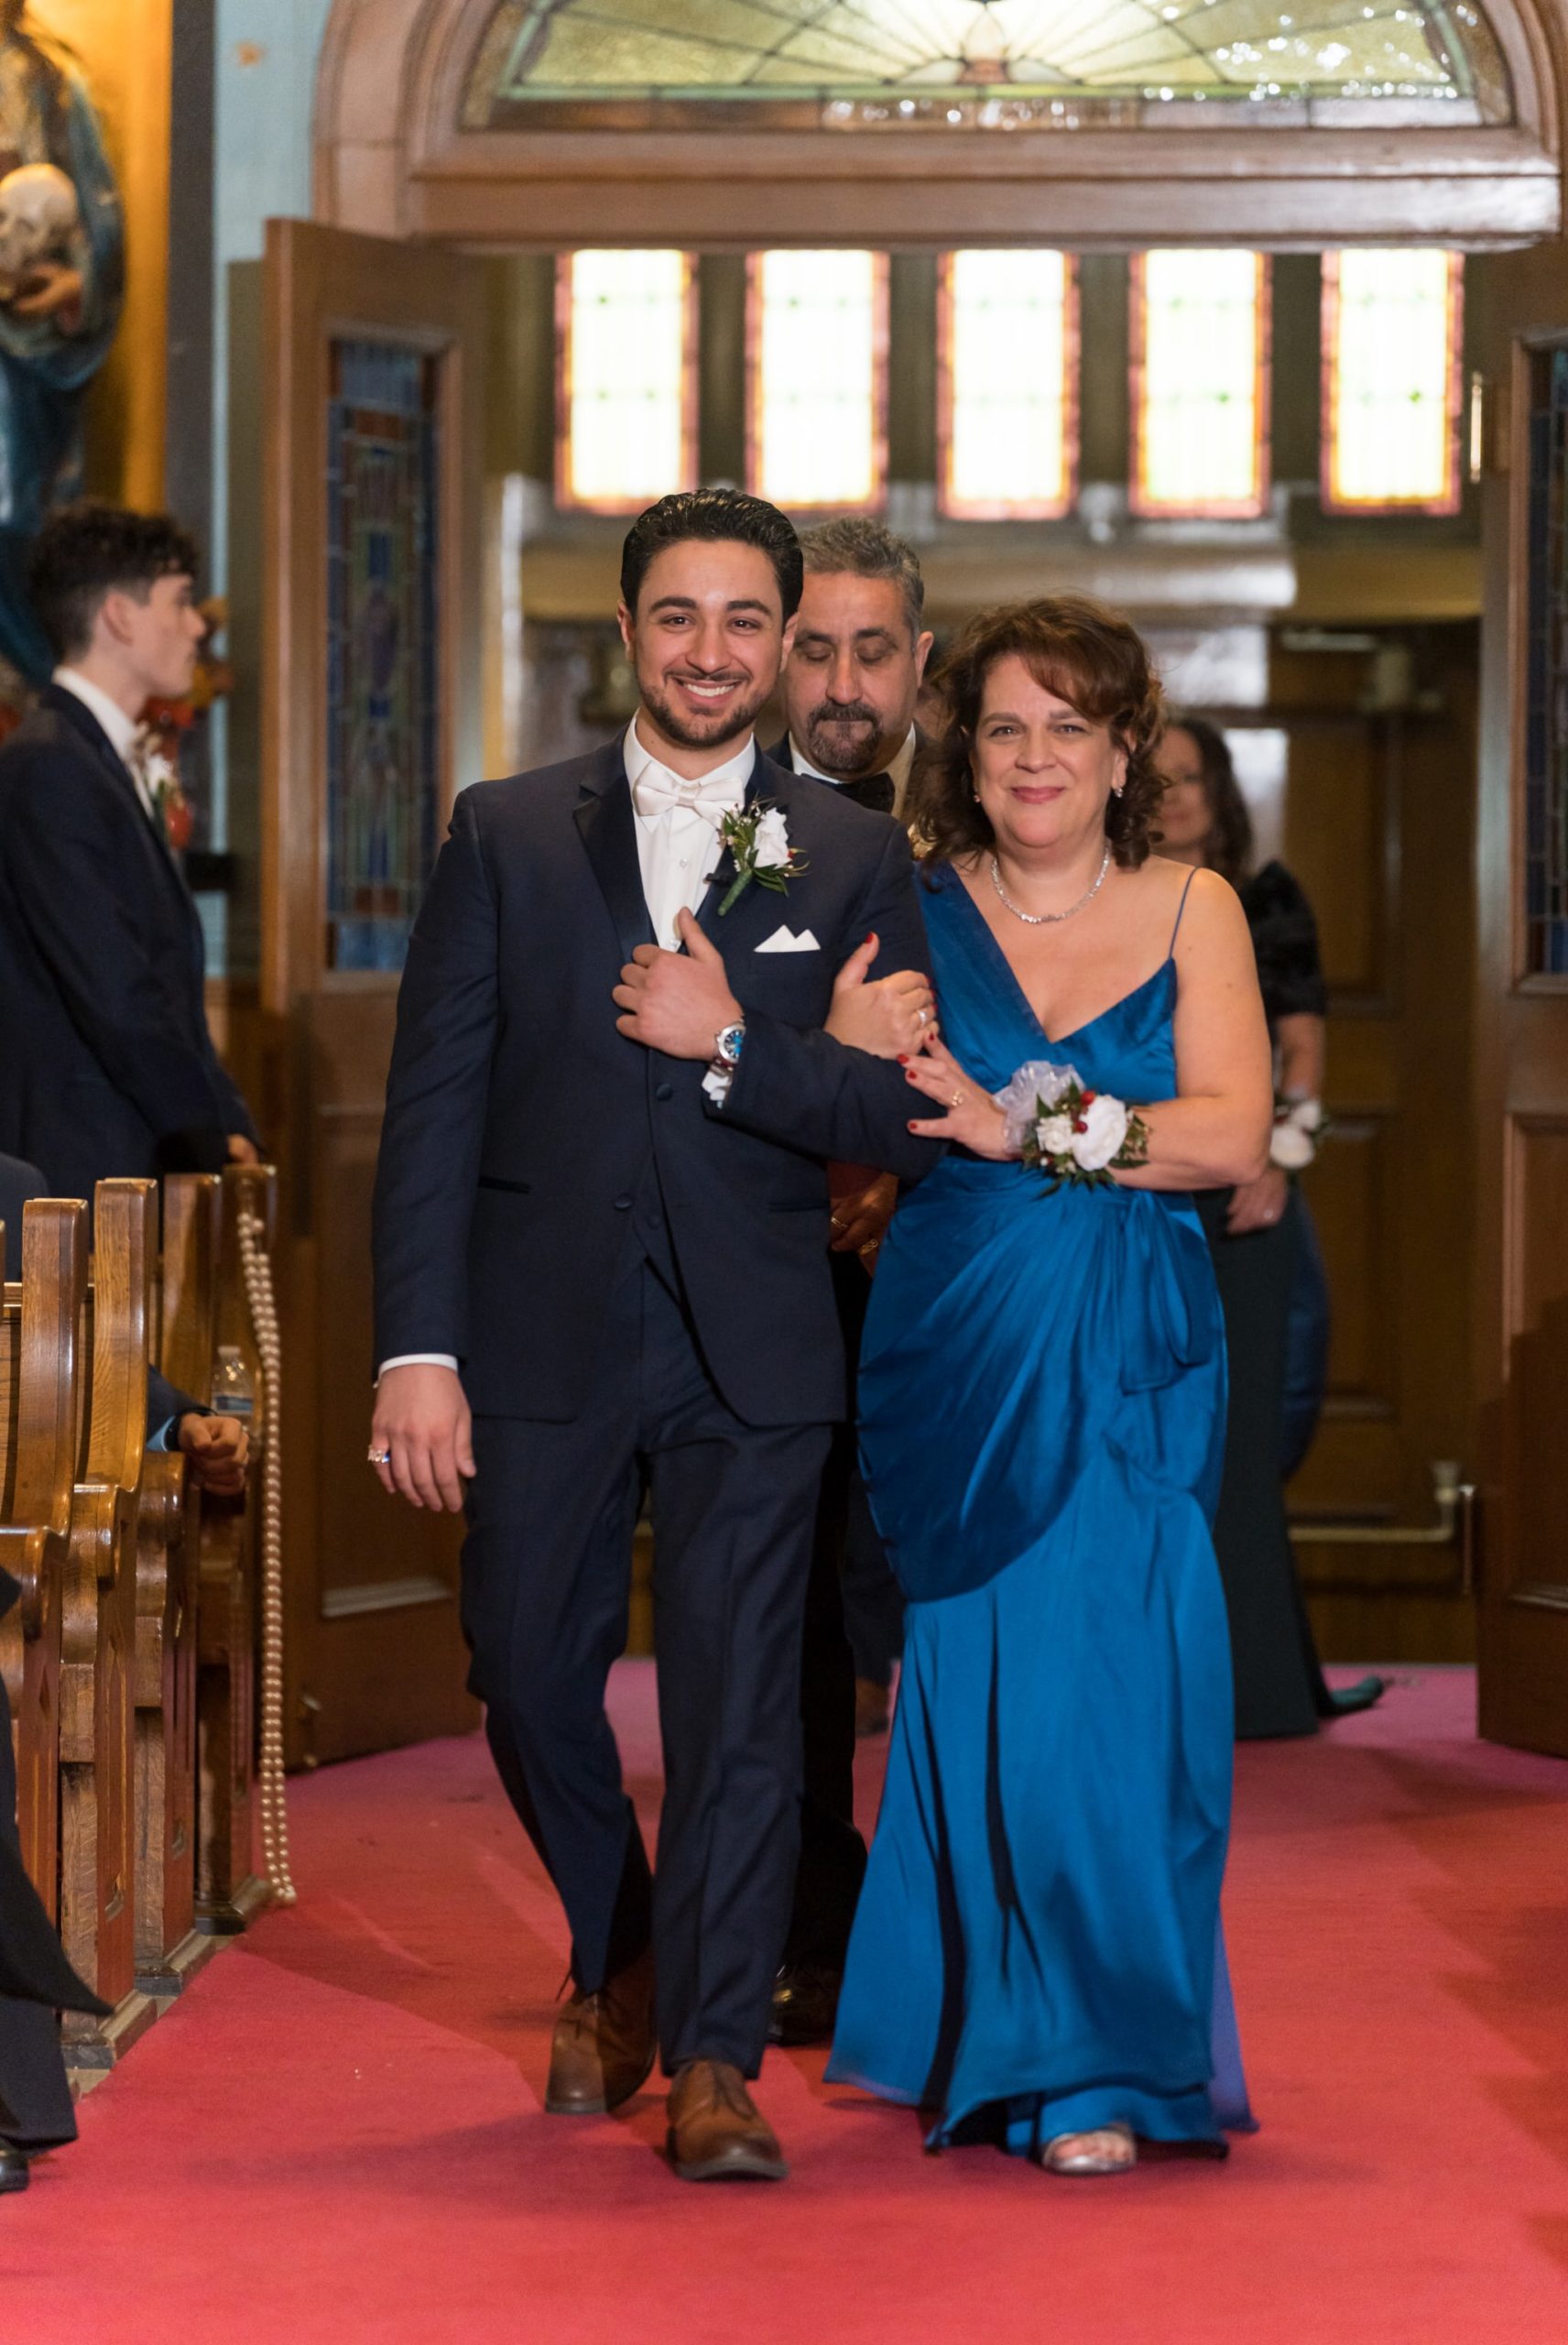 Mom and son walk down the aisle at Holy Family Catholic Church in Detroit.  